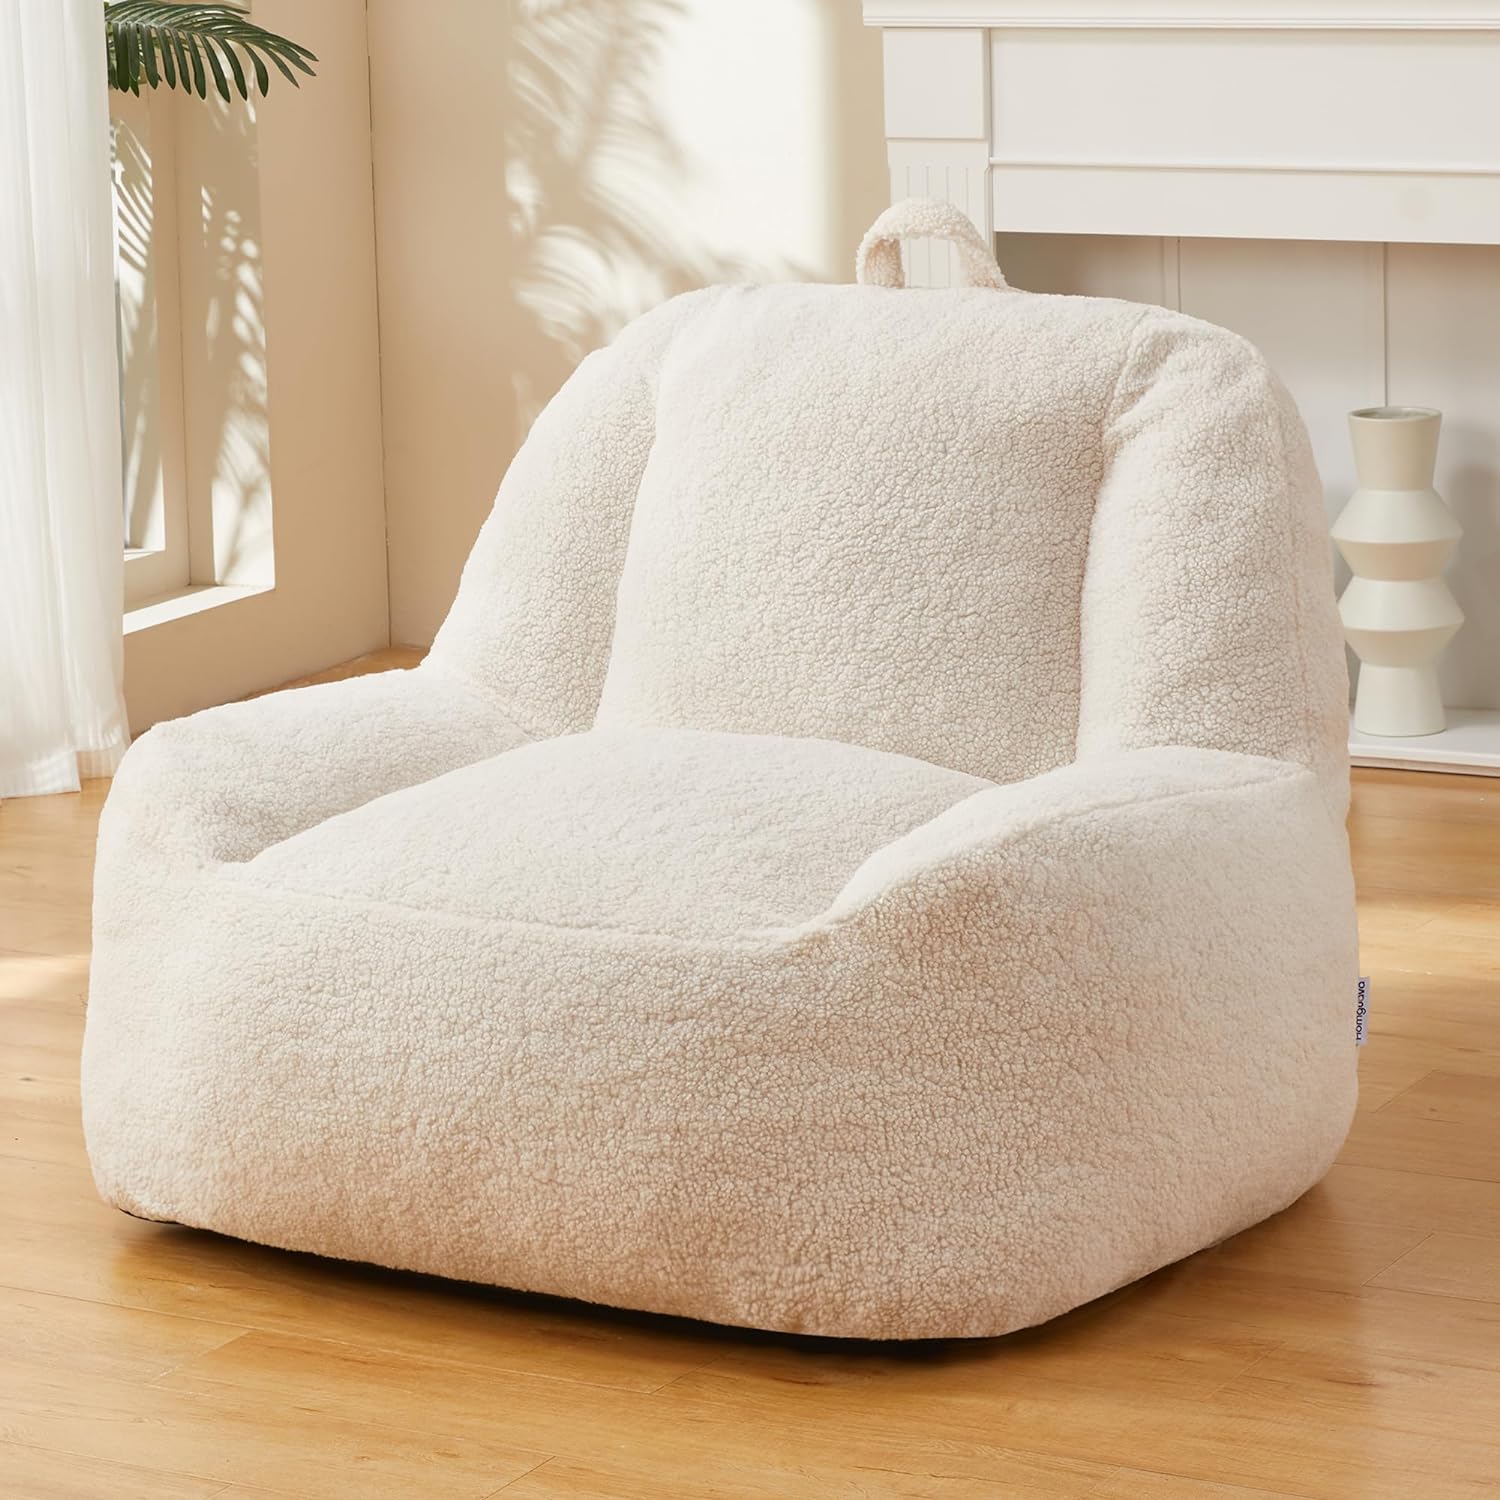 Homguava Bean Bag Chair Sherpa Bean Bag Lazy Sofa Beanbag Chairs for Adults, Teens with High Density Foam Filling Modern Accent Chairs Comfy Chairs for Living Room, Bedrooms